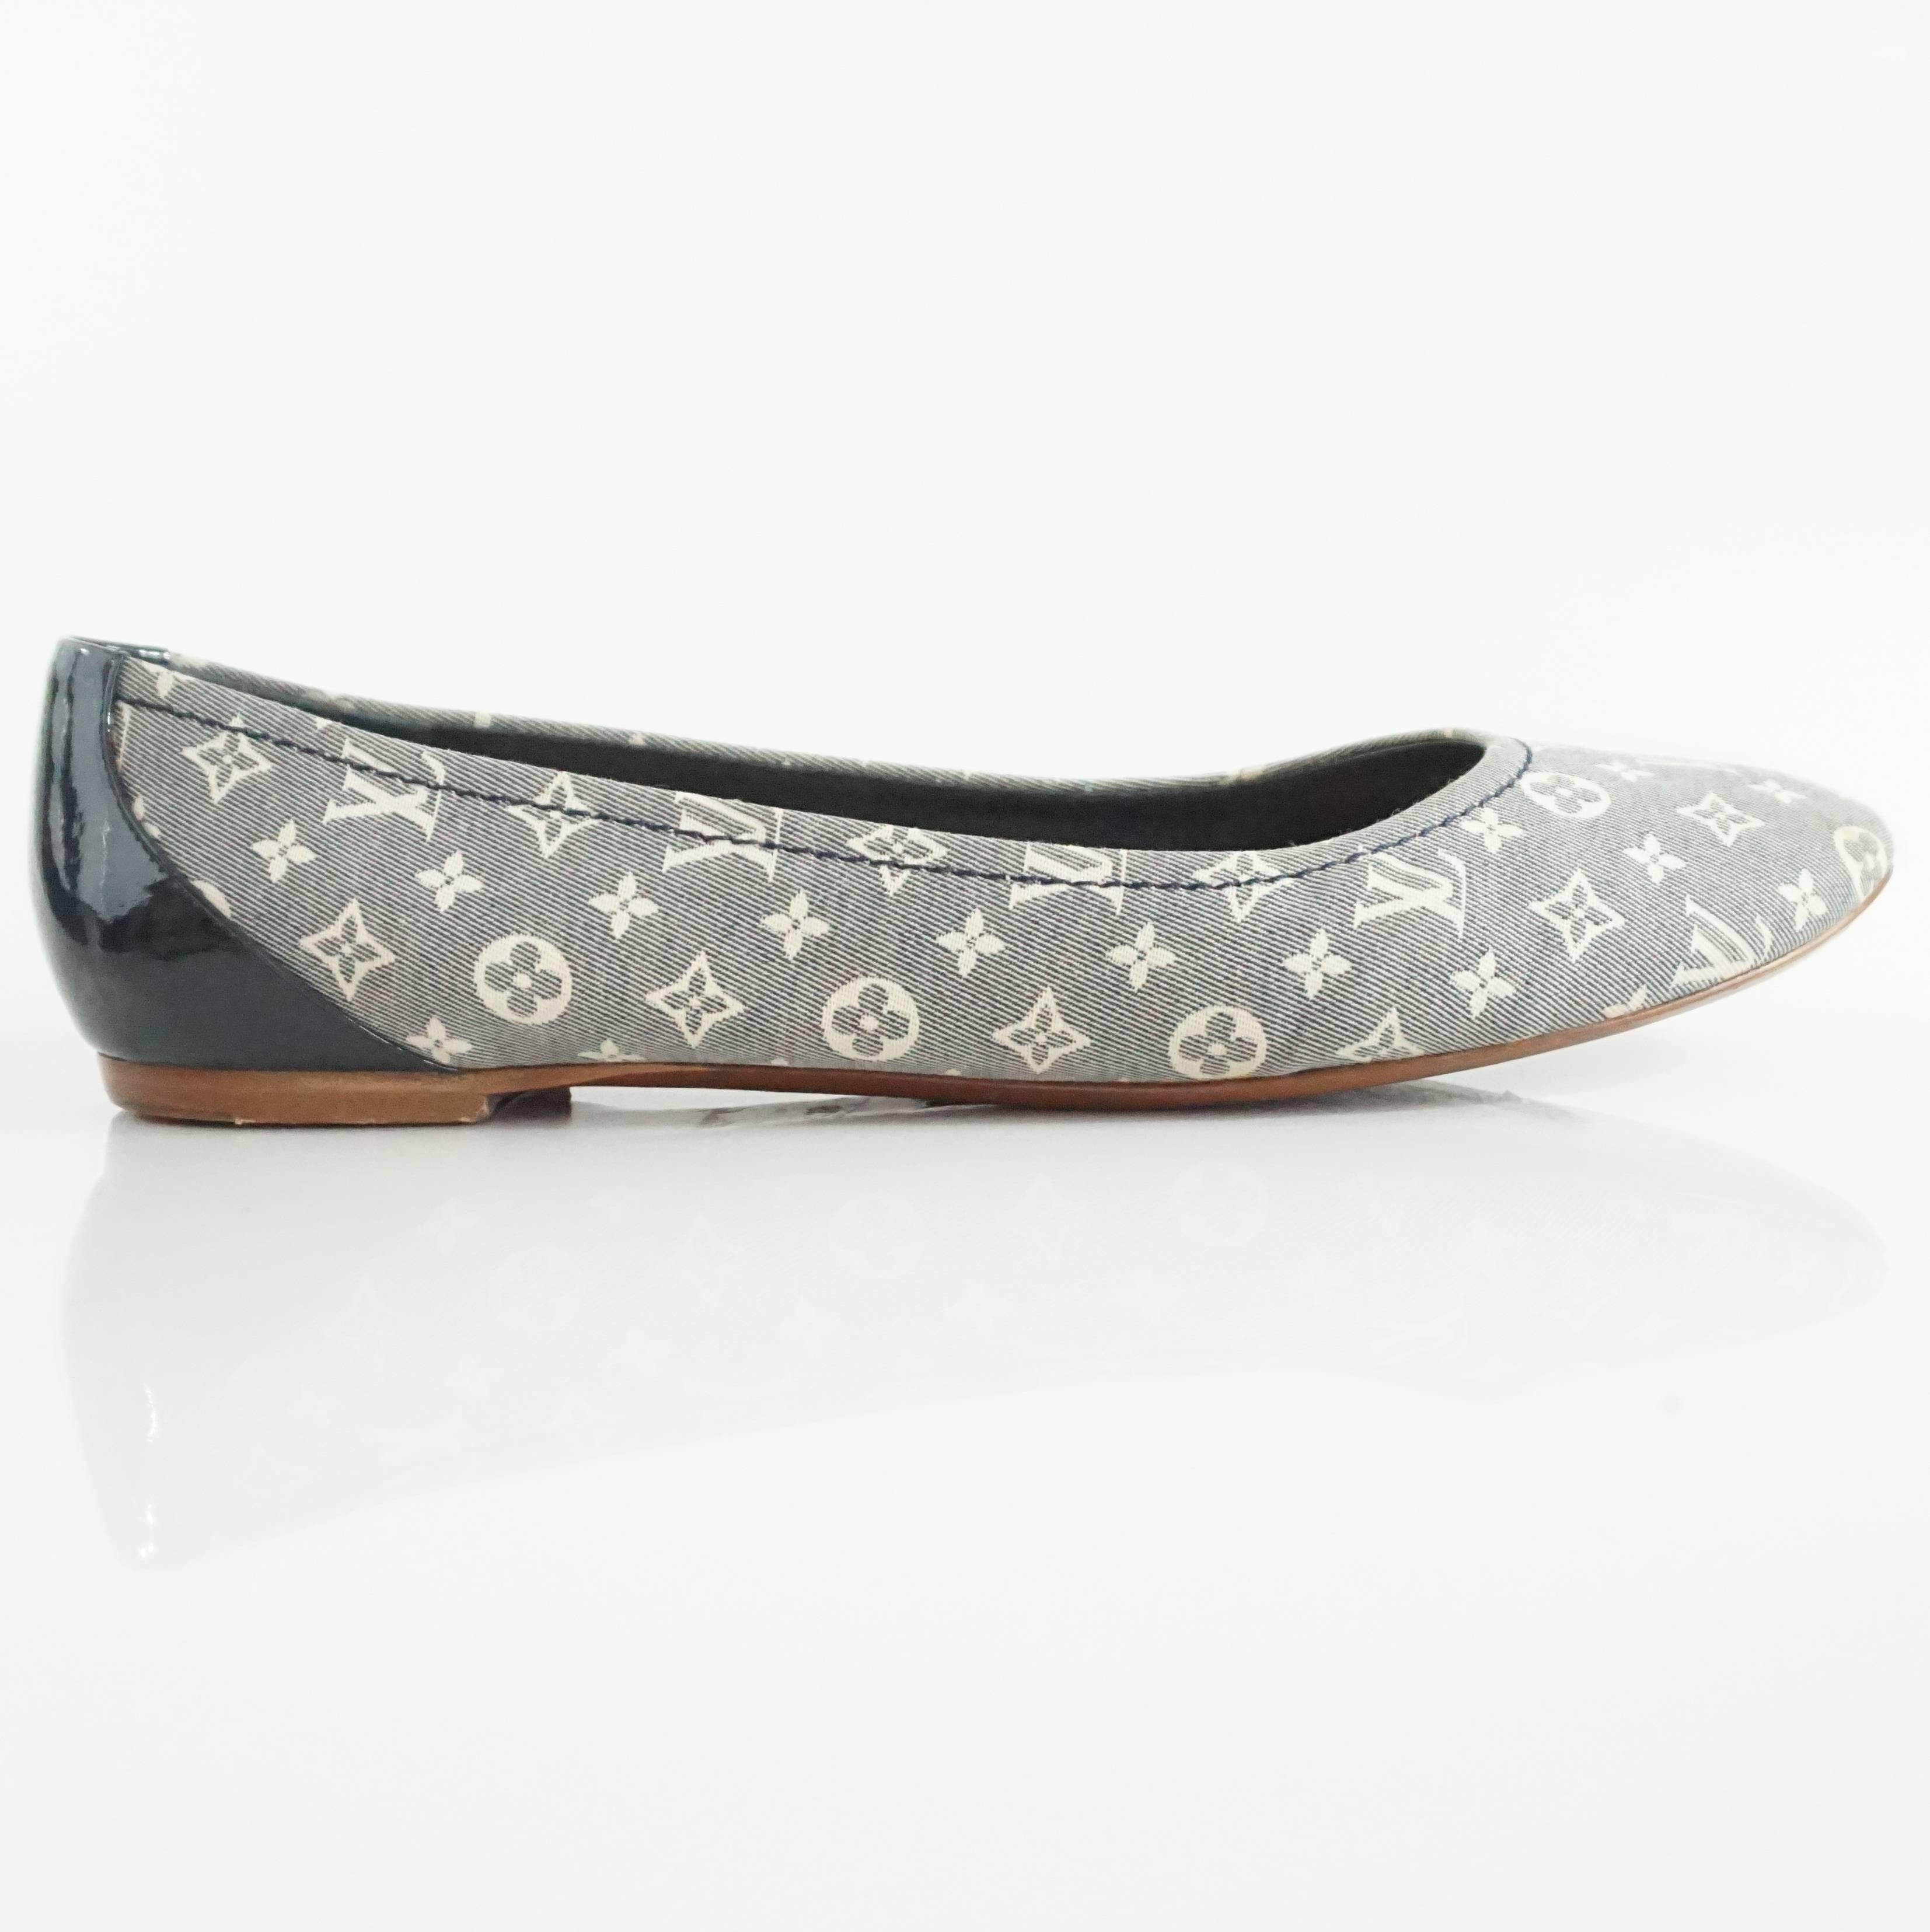 These Louis Vuitton beautiful flats are navy with an ivory monogram print. There is navy patent leather on the heels. These flats are in very good condition with minor staining and marks on the back.